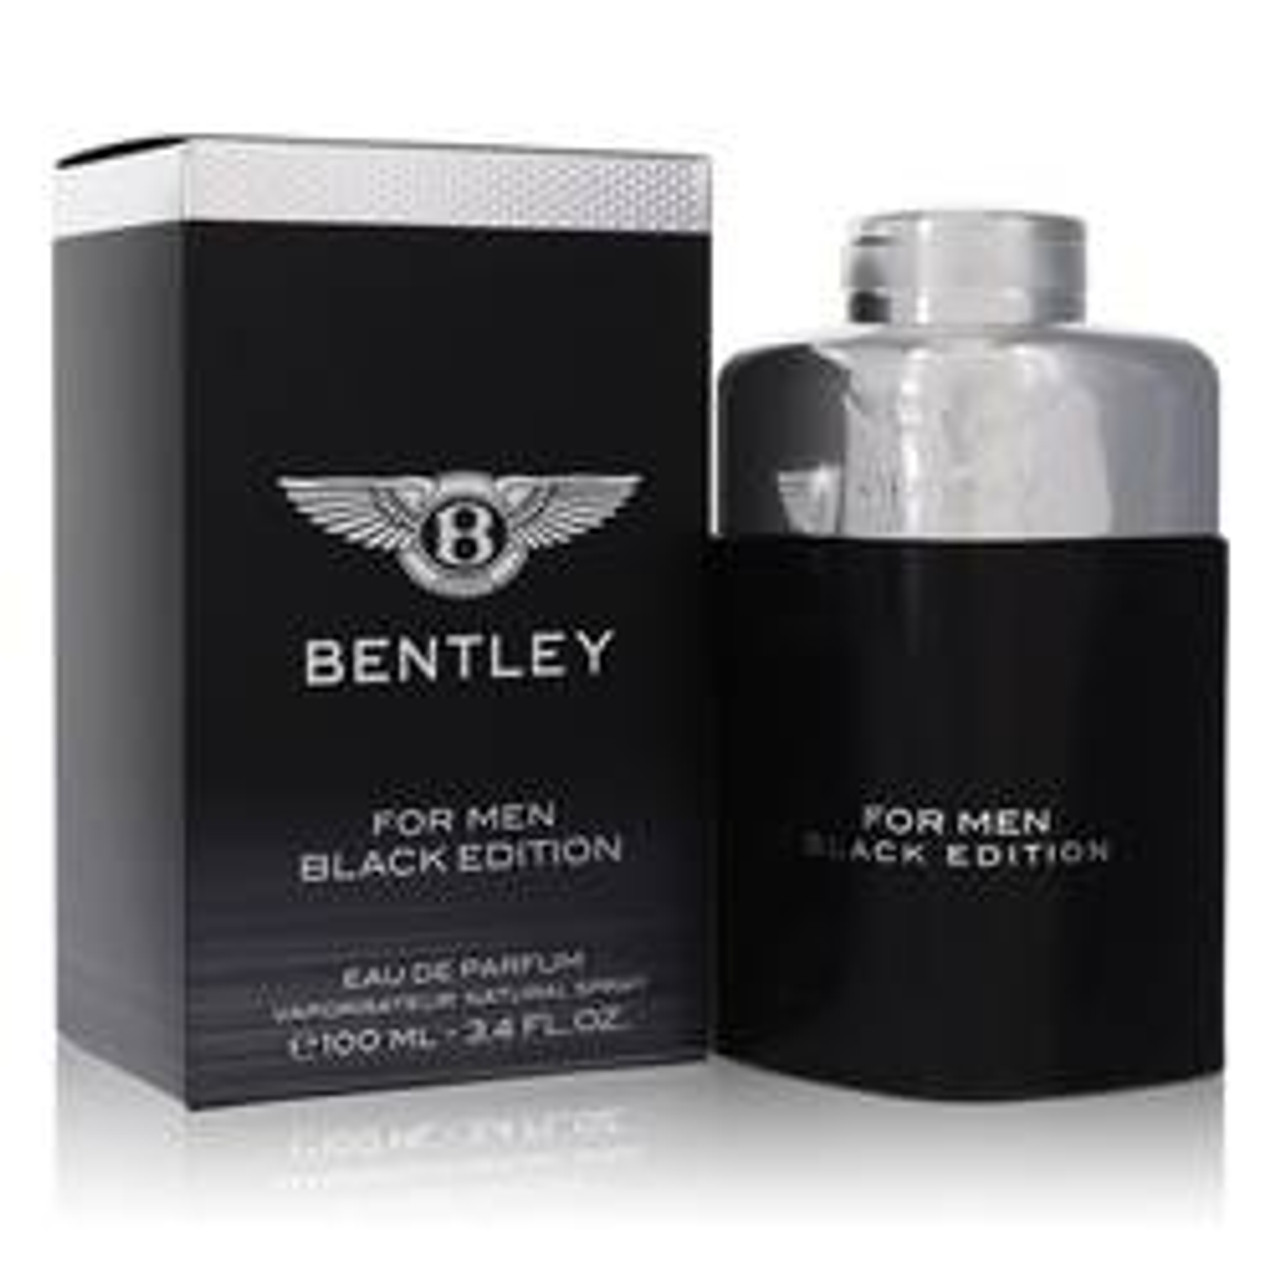 Bentley Black Edition Cologne By Bentley Eau De Parfum Spray 3.4 oz for Men - [From 104.00 - Choose pk Qty ] - *Ships from Miami